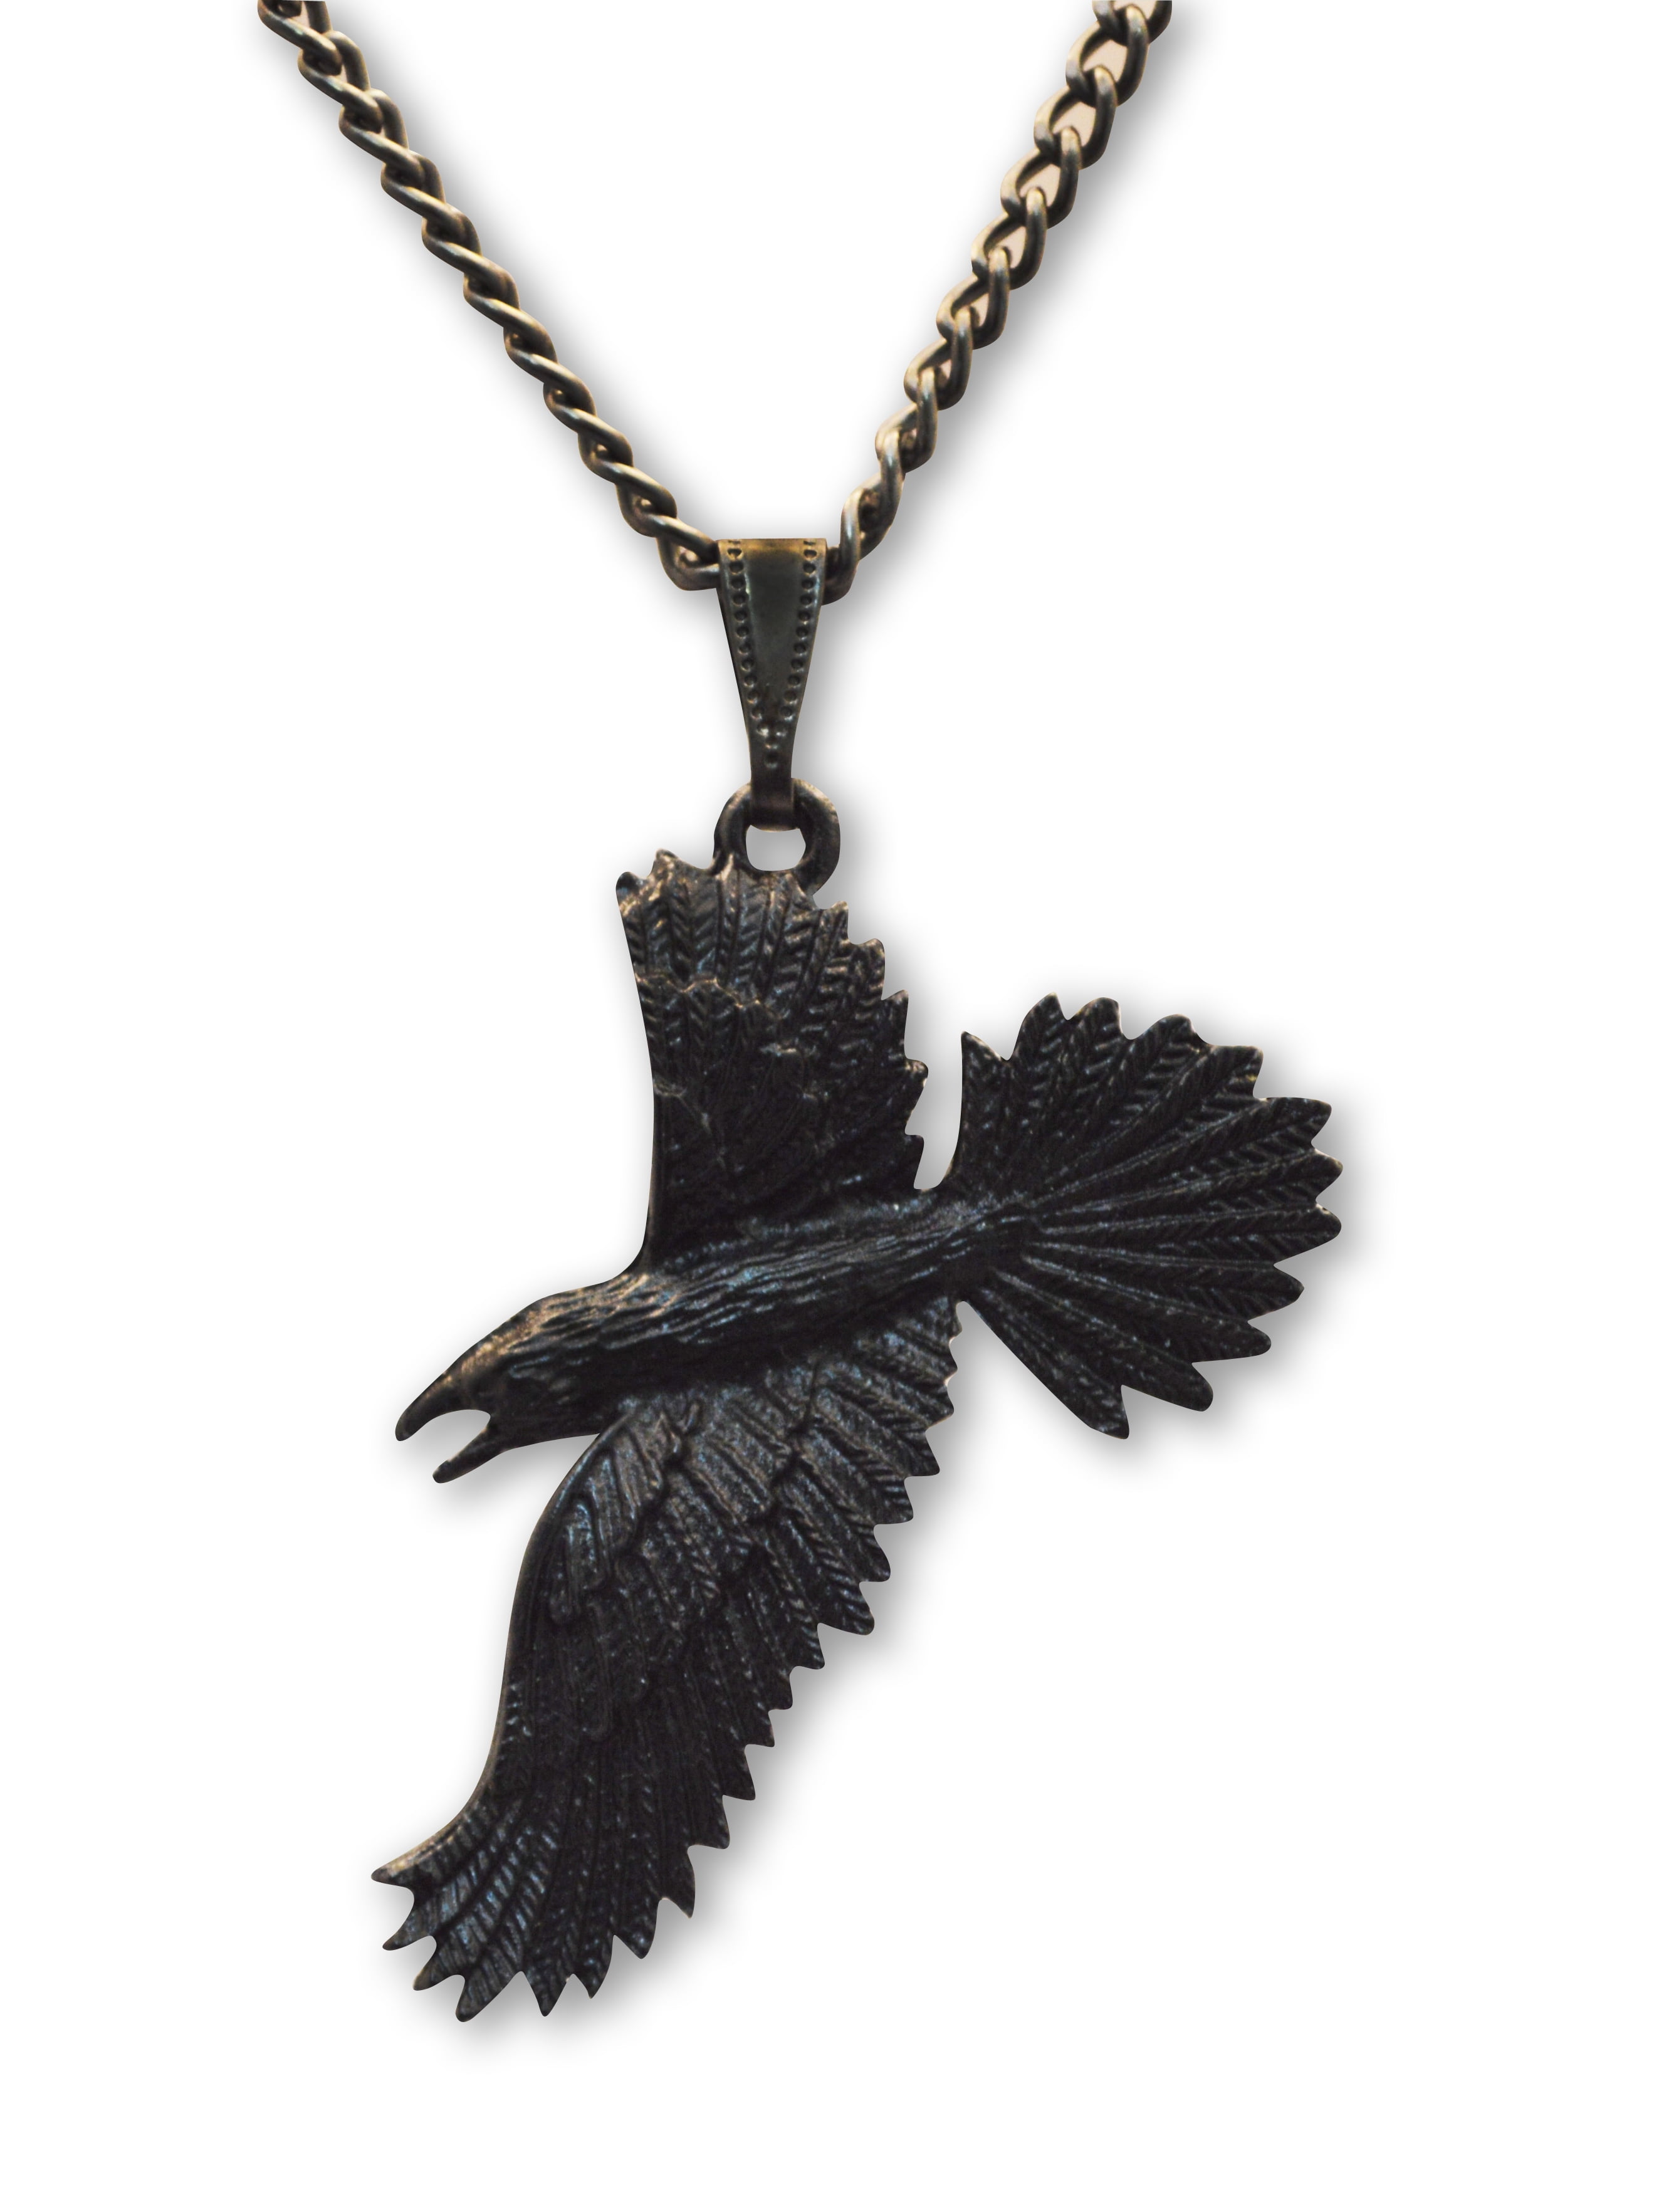 Black Raven Black Crow Gothic Pewter Pendant Necklace by Real Metal NK ...